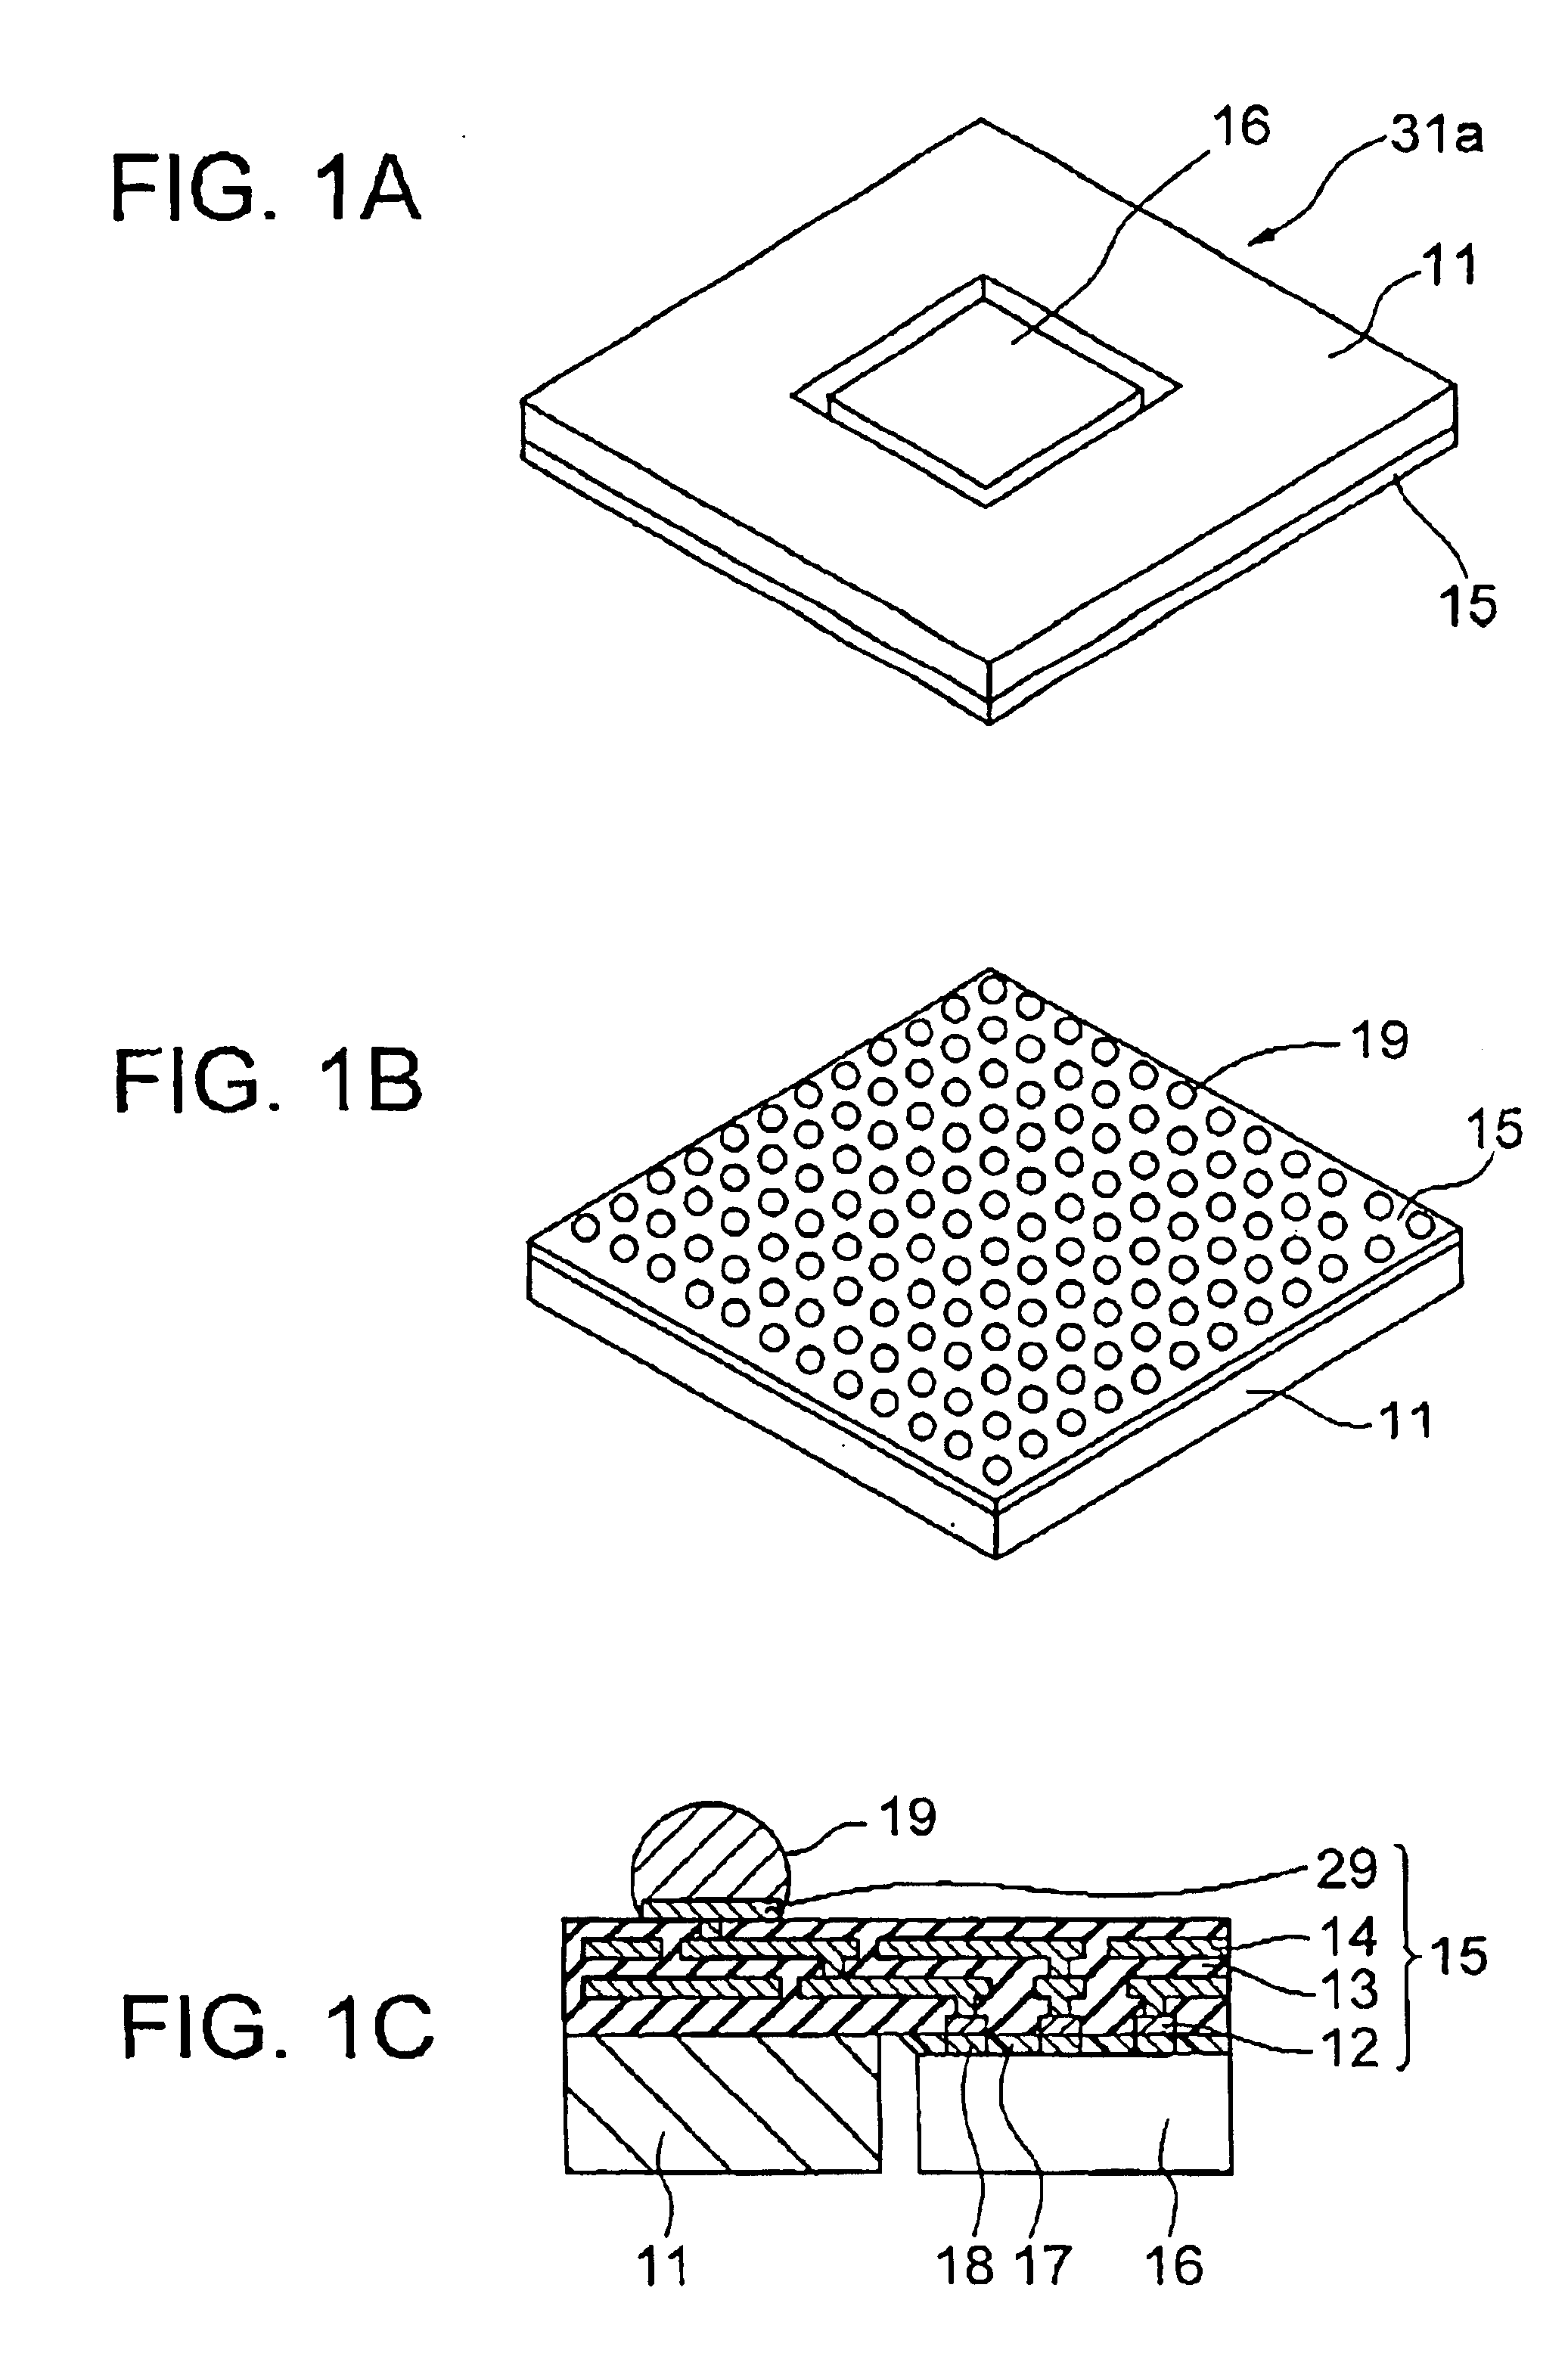 Semiconductor package board using a metal base